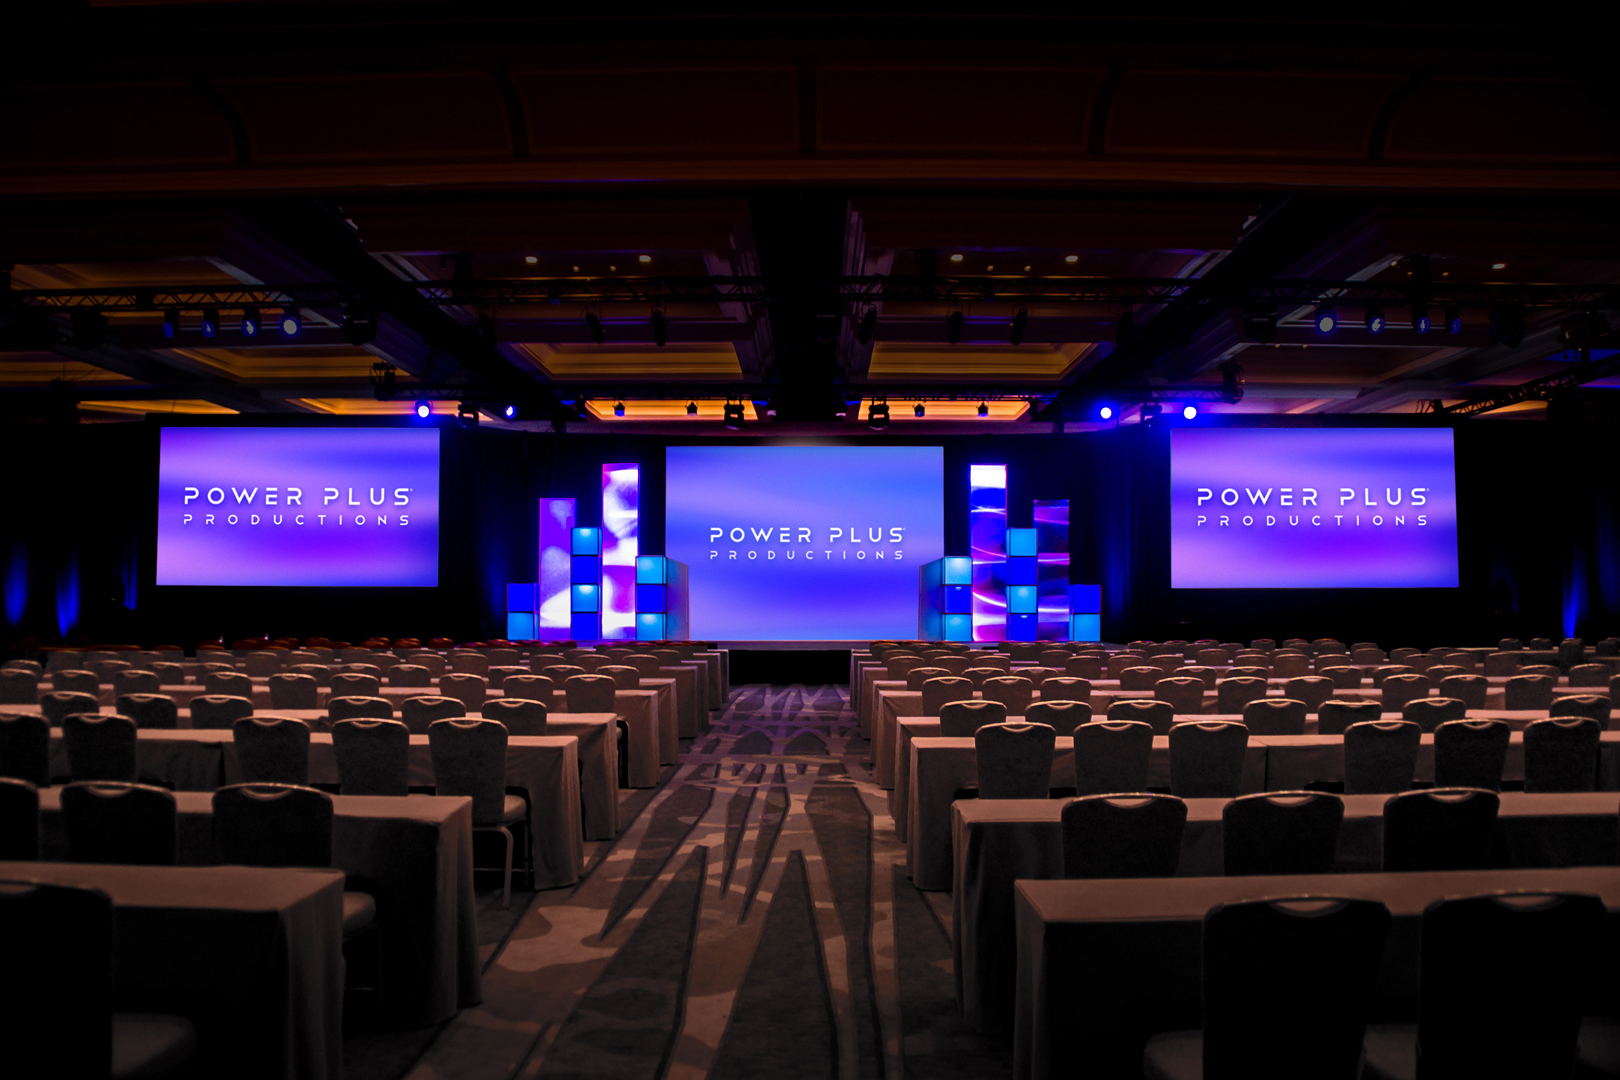 BFAS Conference stage with test screens